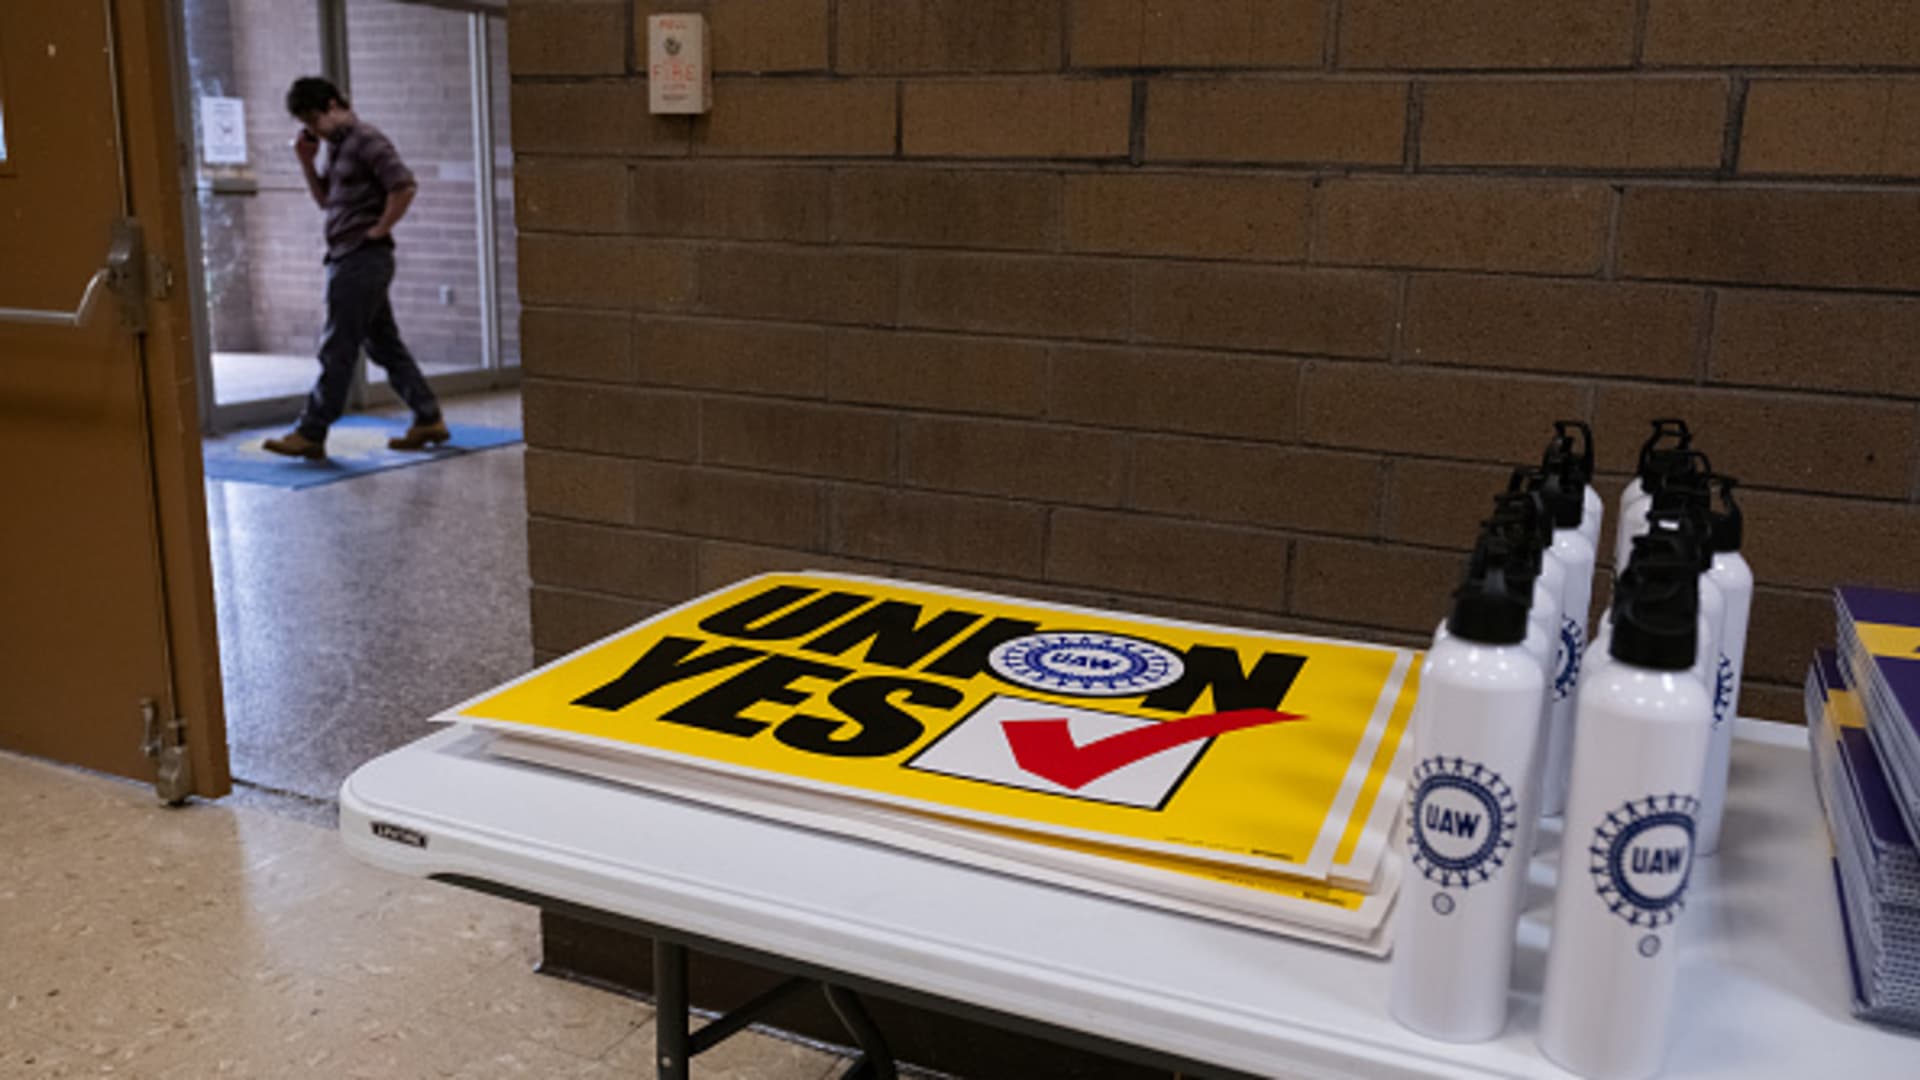 UAW signs and water bottles are shown inside the I.B.E.W. building in Chattanooga, Tennessee on April 10, 2024. 